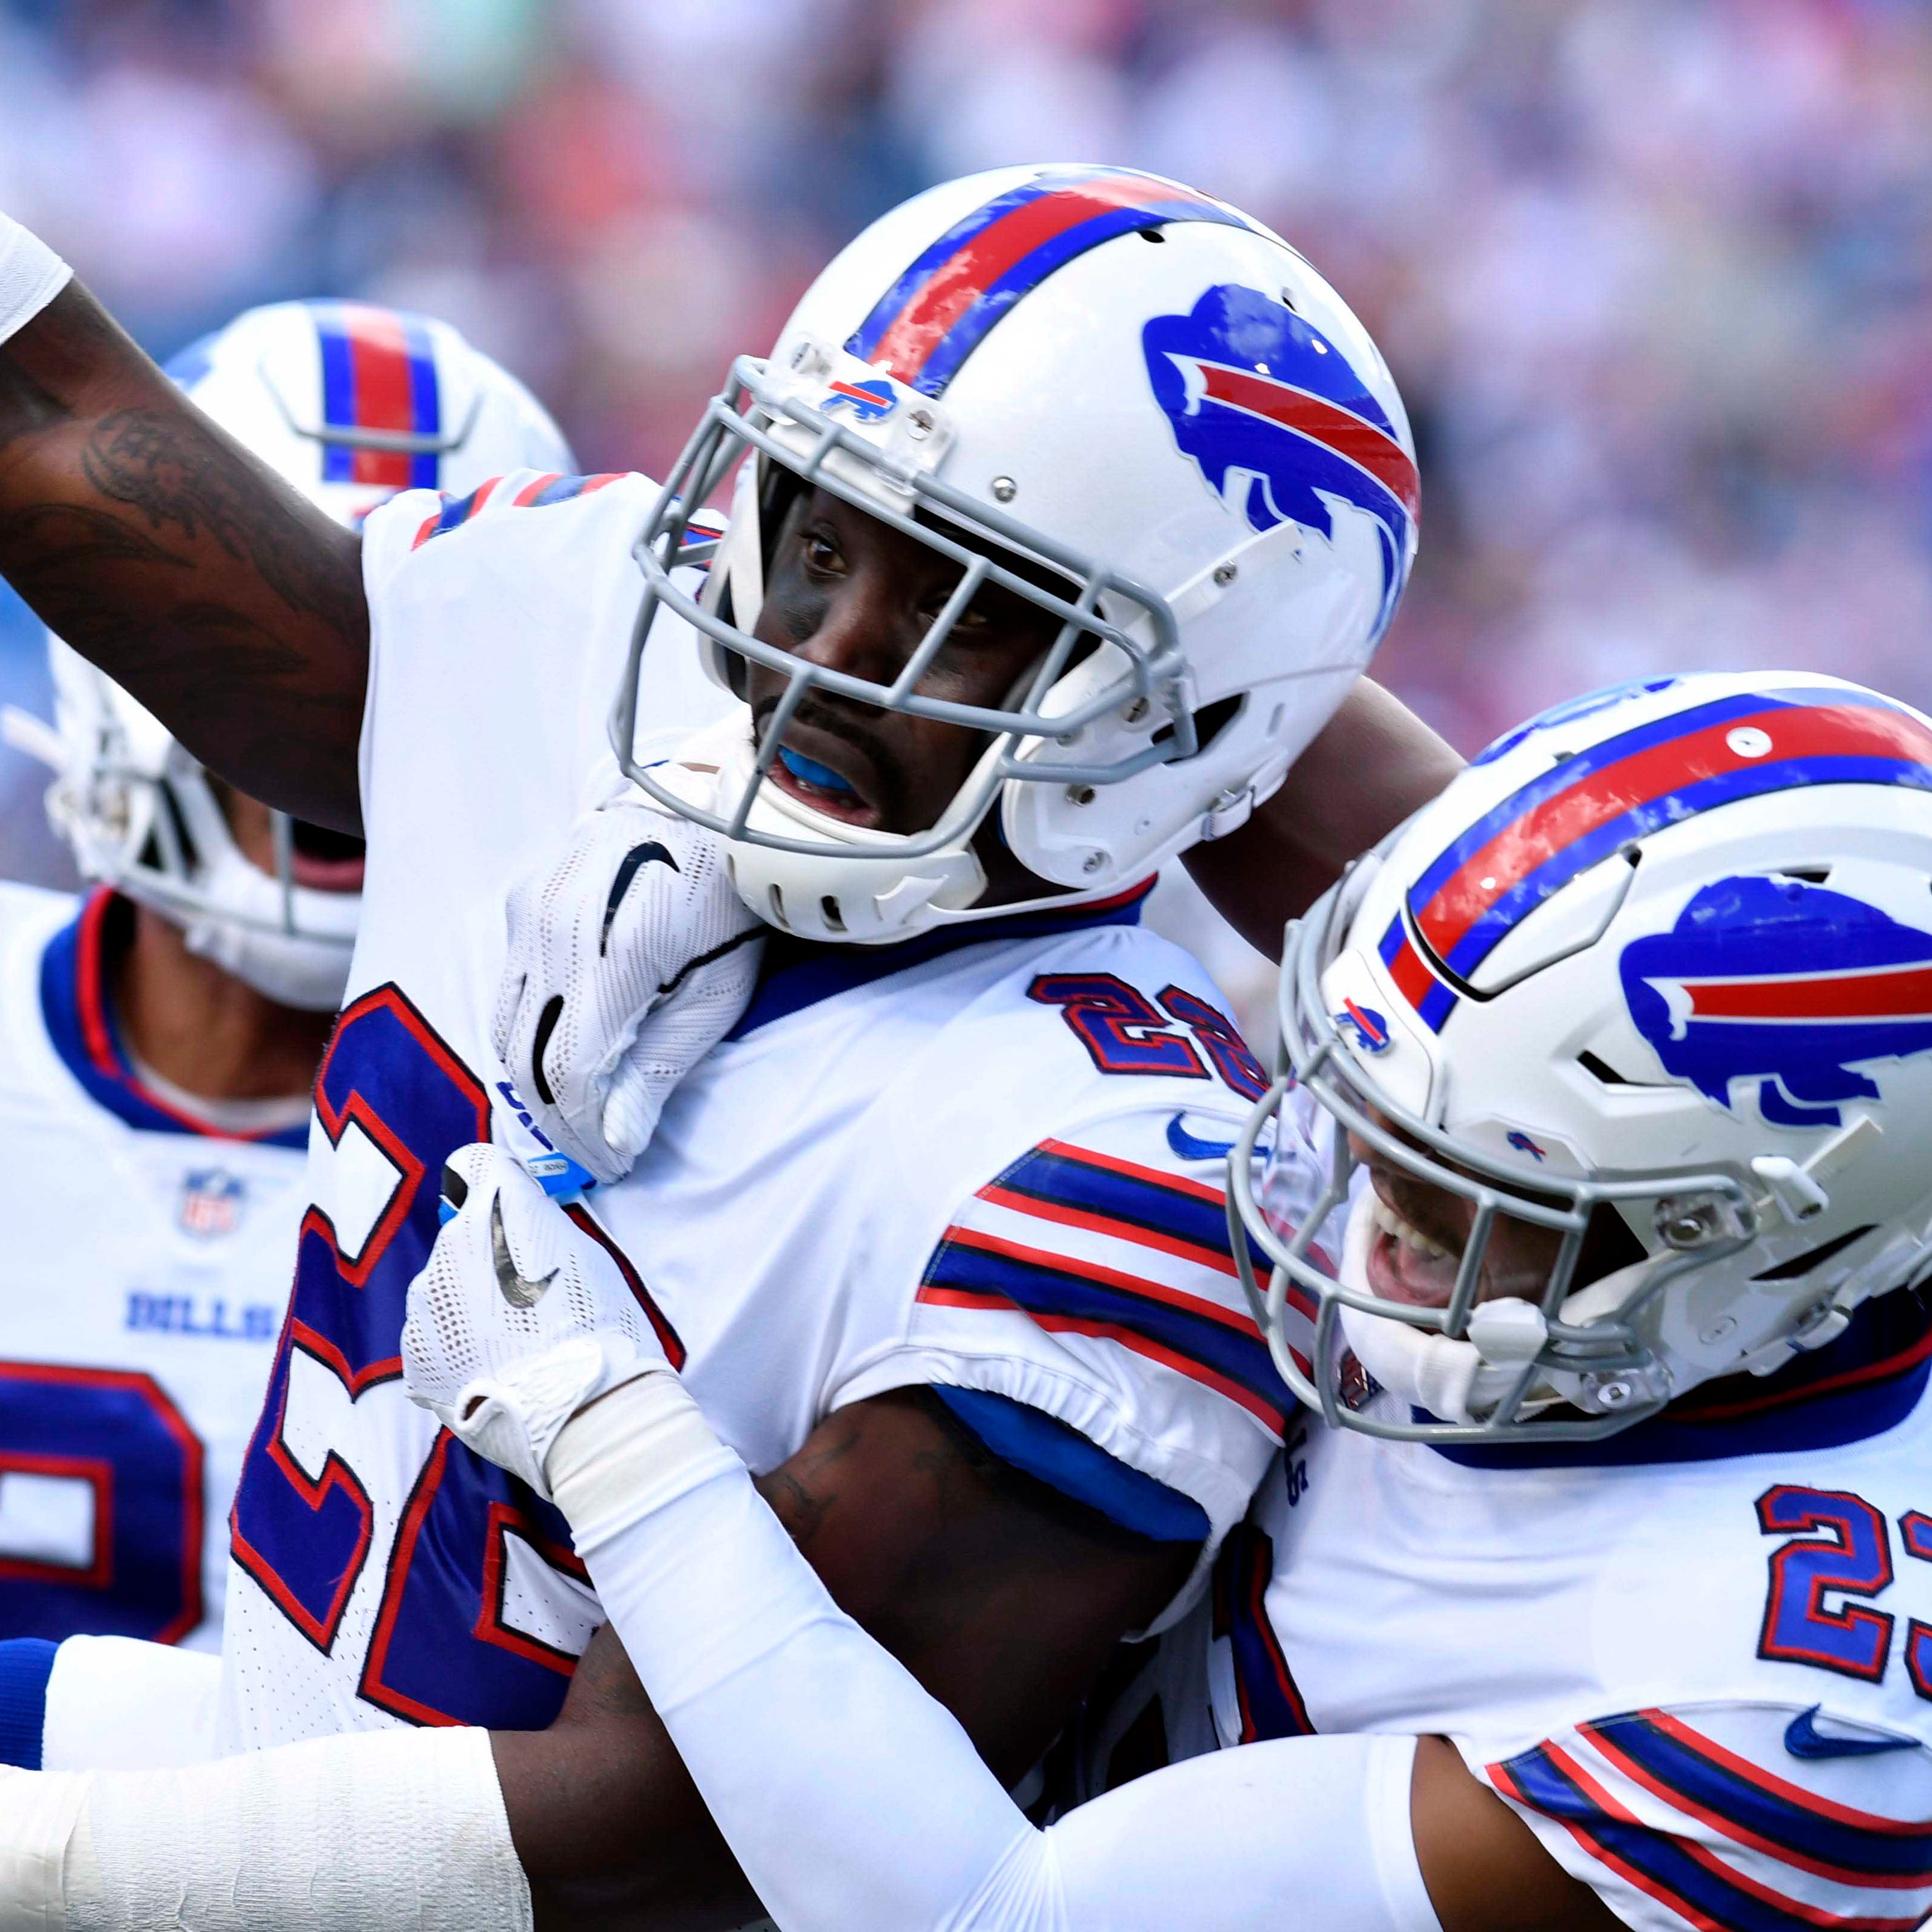 Bills defensive back Vontae Davis, center, celebrates making a third-down stop in the first quarter of Sunday's game vs. the Chargers.